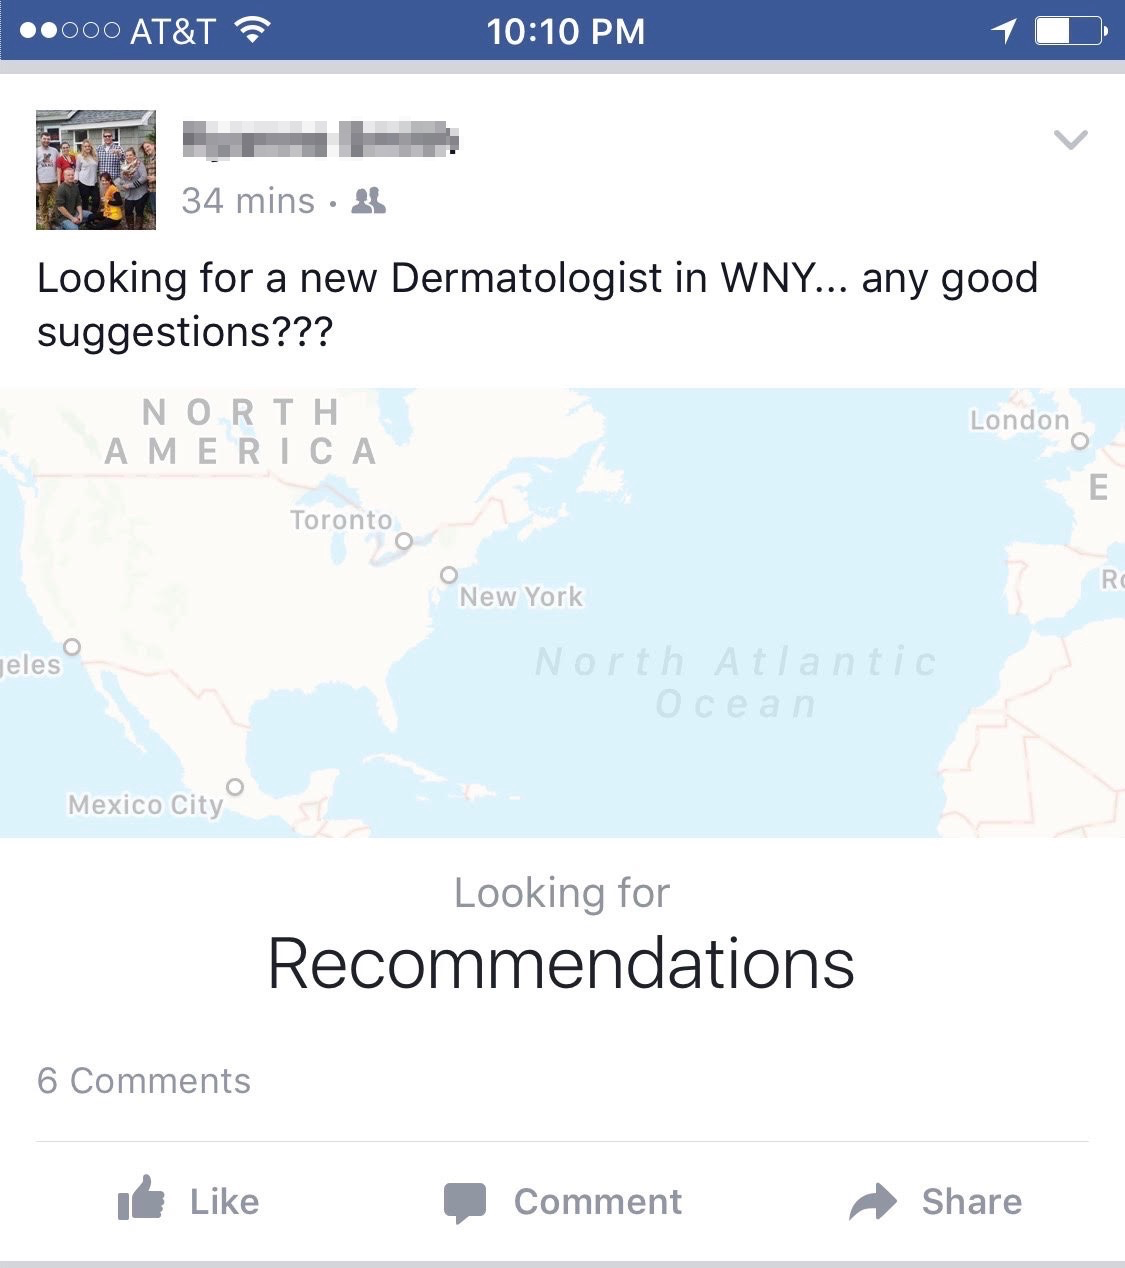 You can see the prominent "Recommendations" message in the Facebook post above.